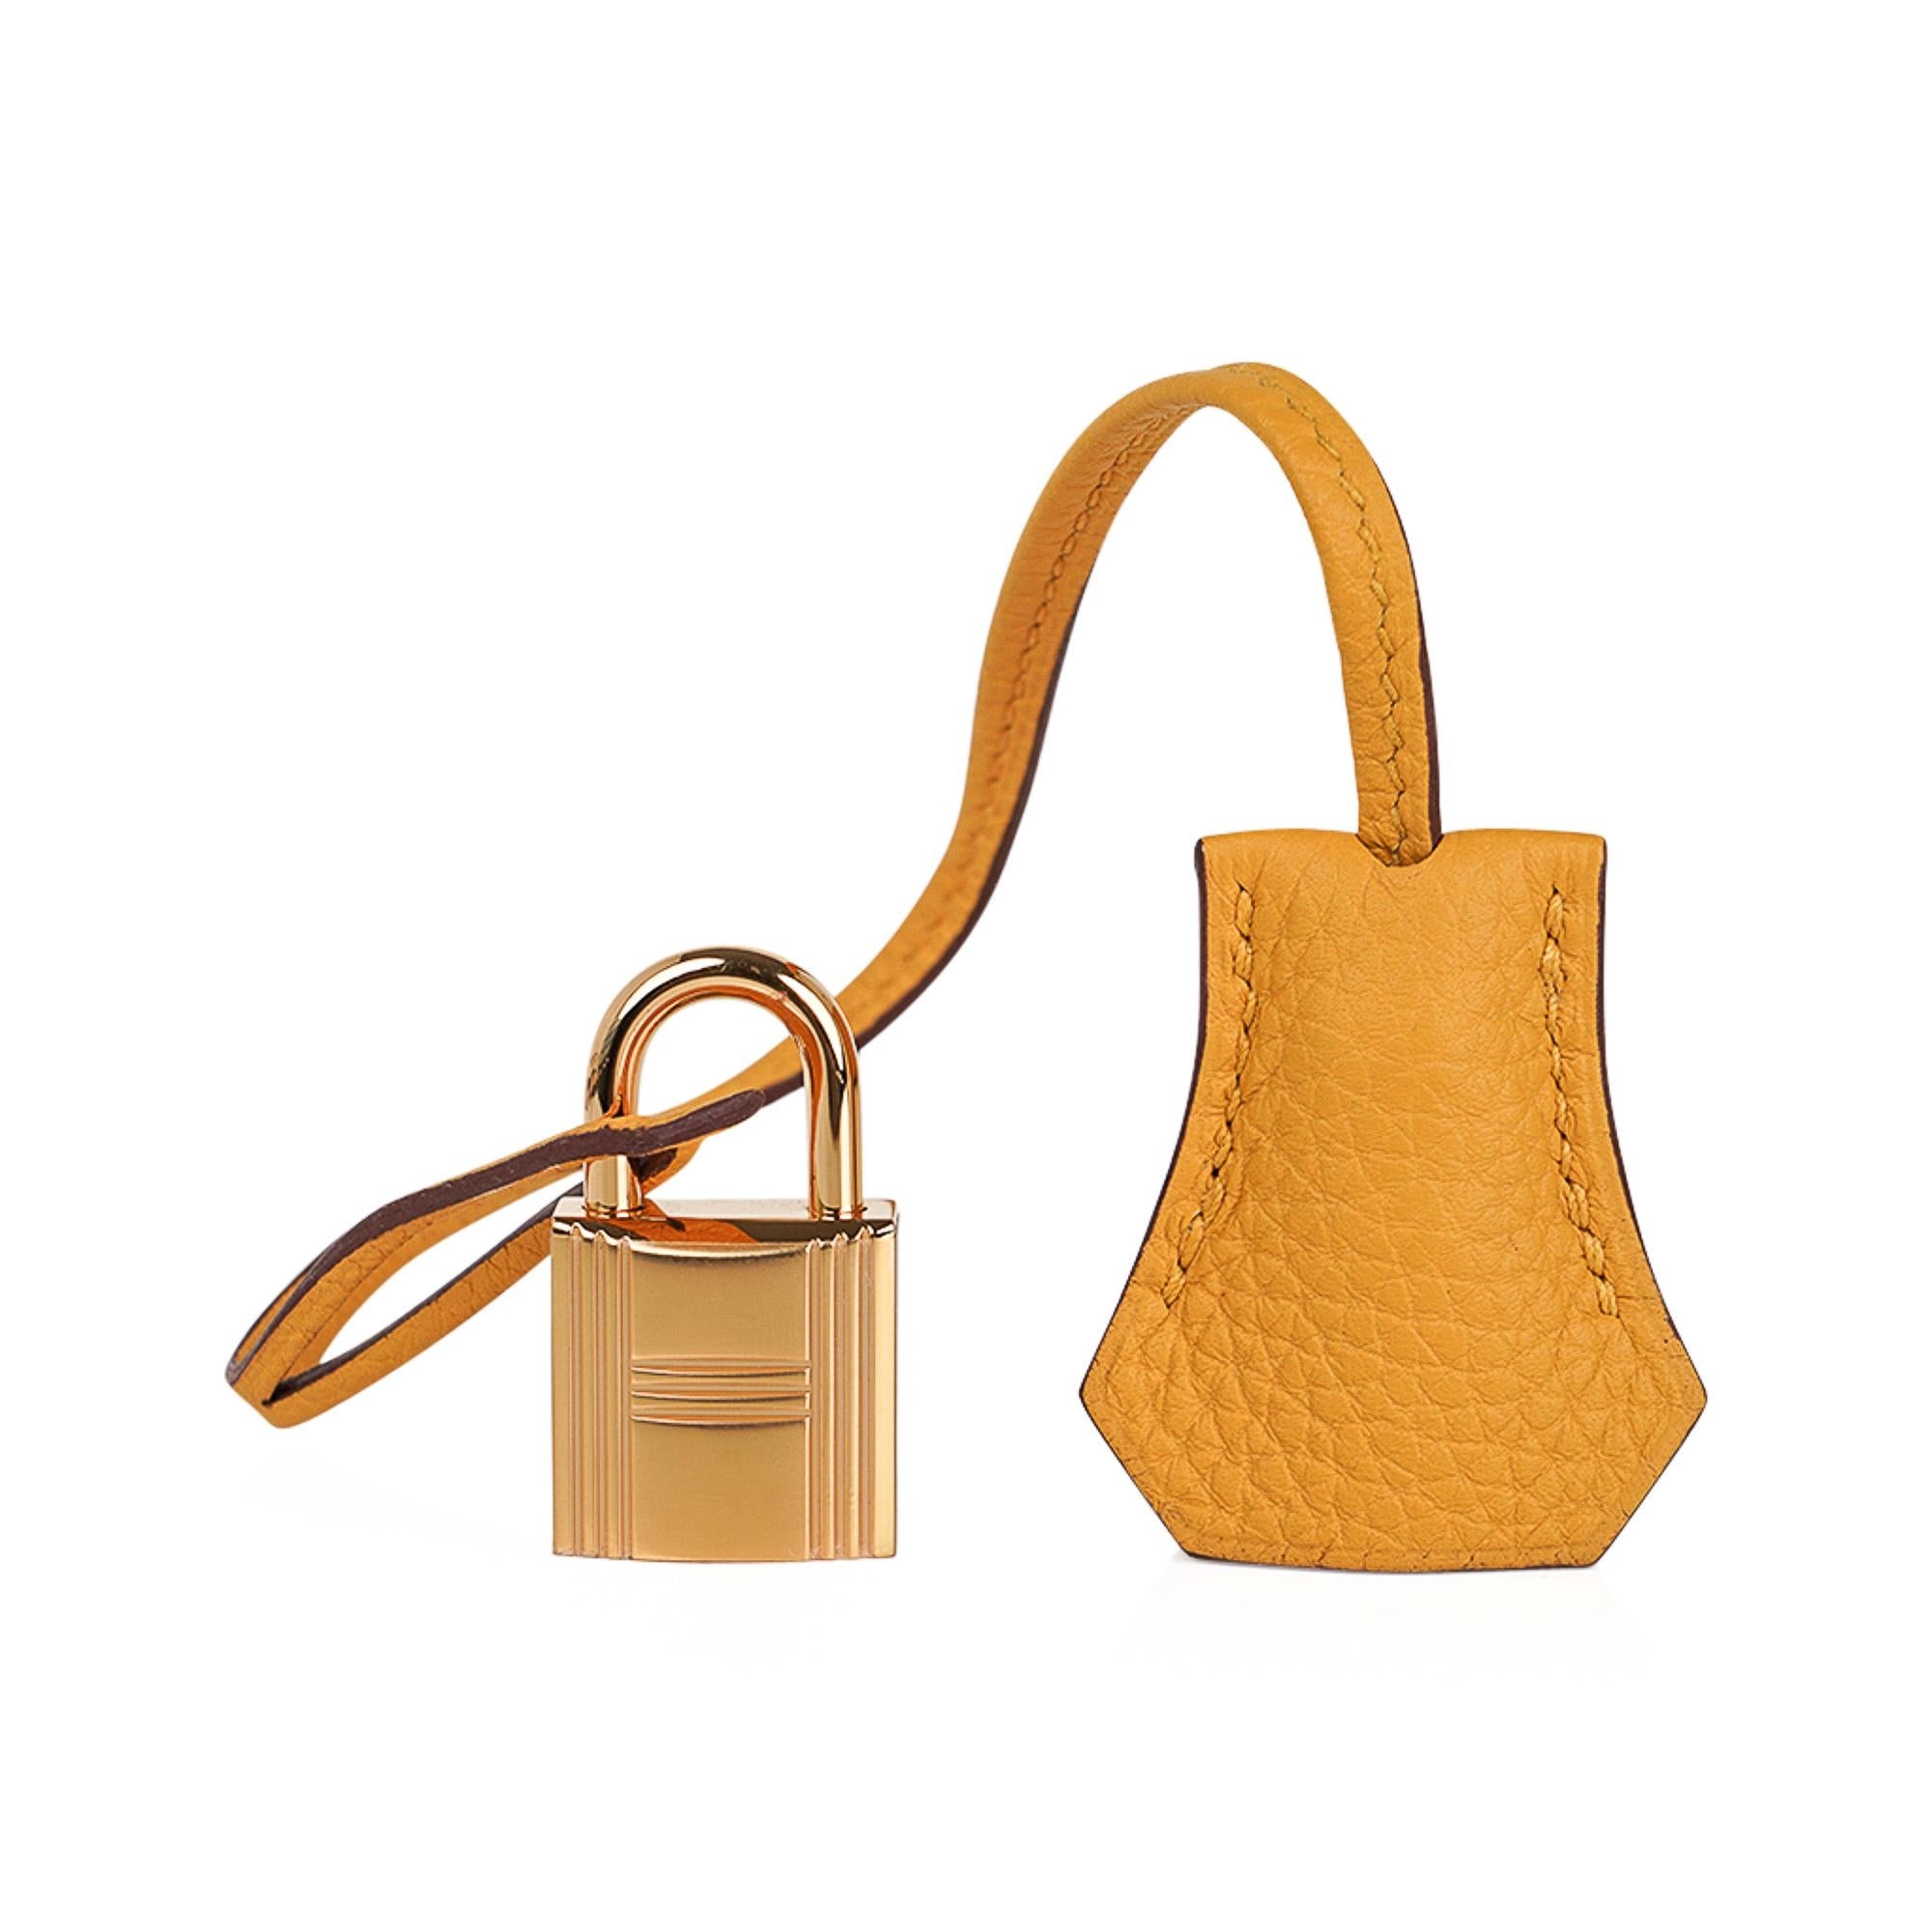 Mightychic offers a guaranteed authentic Hermes Birkin 30 bag featured in warm Jaune Ambre yellow.
Accentuated with gold hardware.
Neutral with a pop of colour, this beautiful Hermes Birkin bag is great for year round wear.
Togo leather is supple to